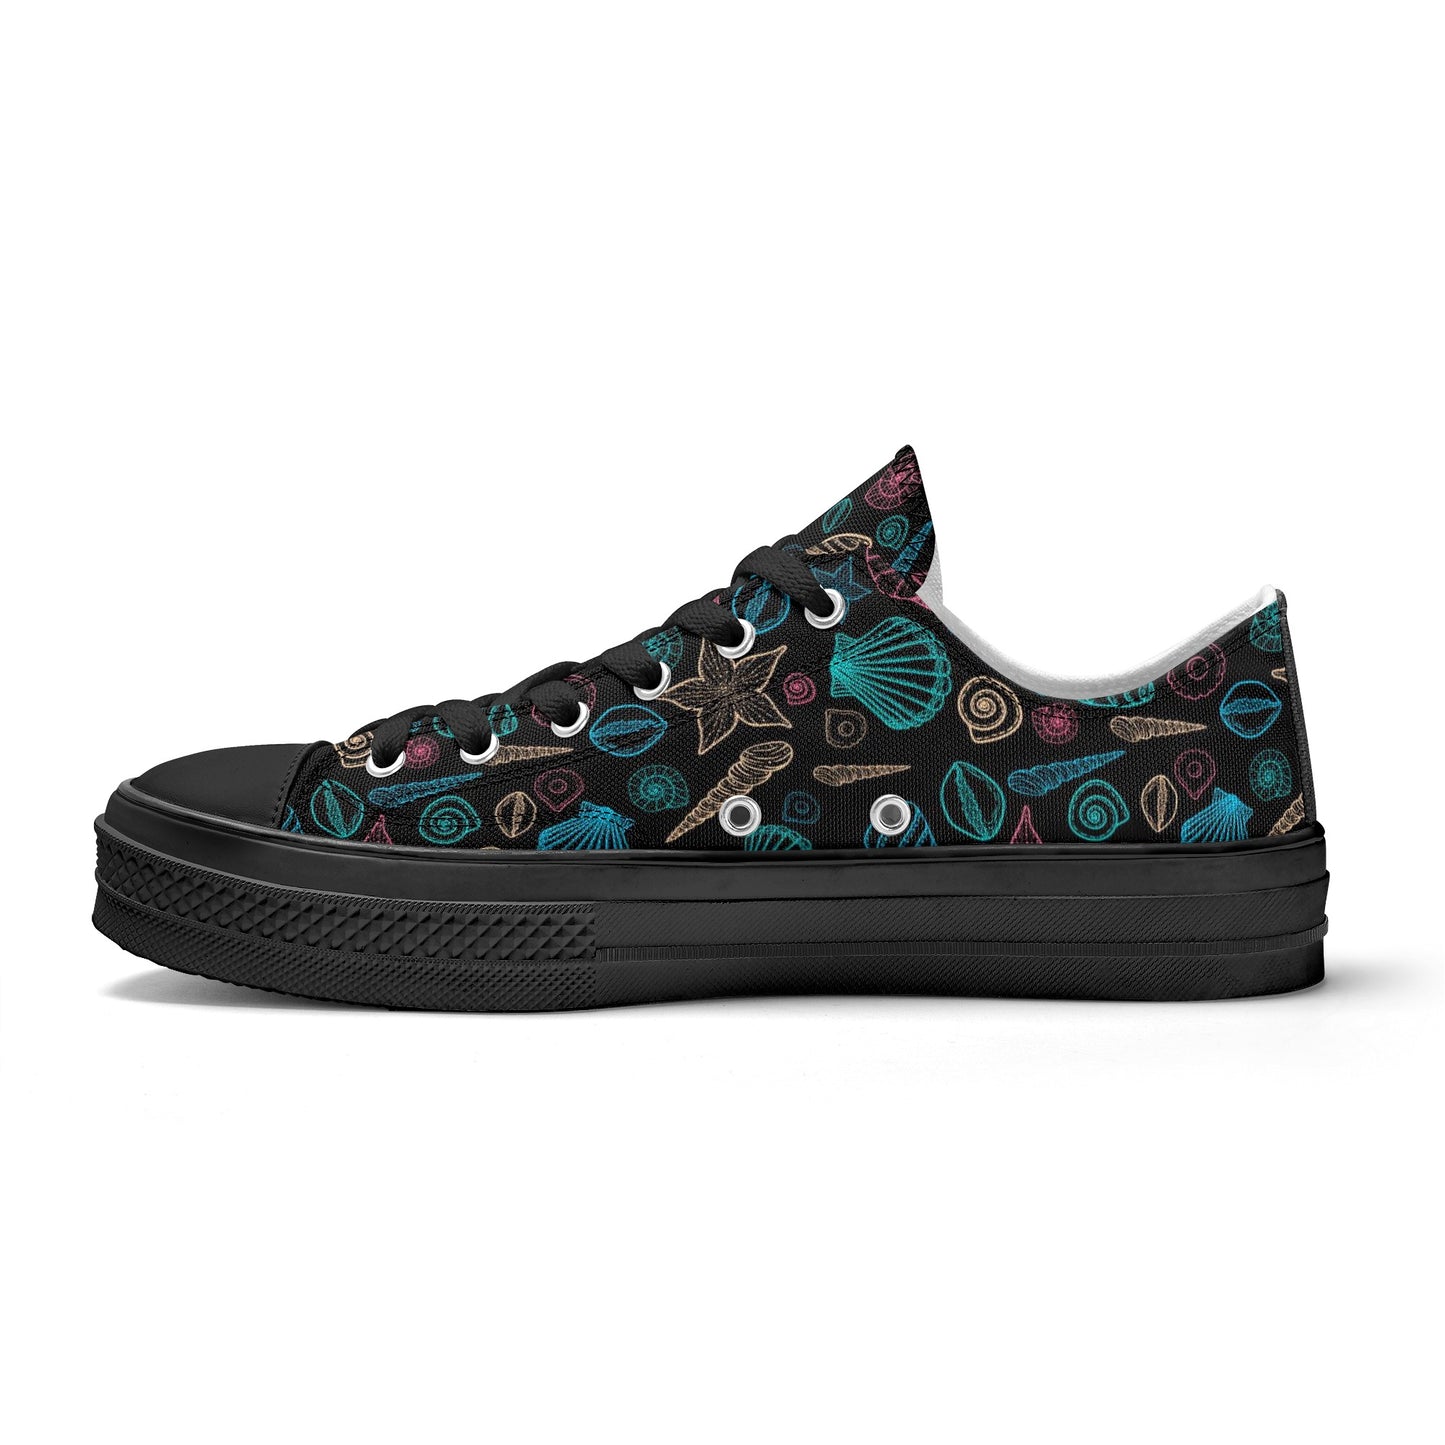 Beach & Seashells Pattern - Womens Classic Low Top Canvas Shoes for Footwear Lovers